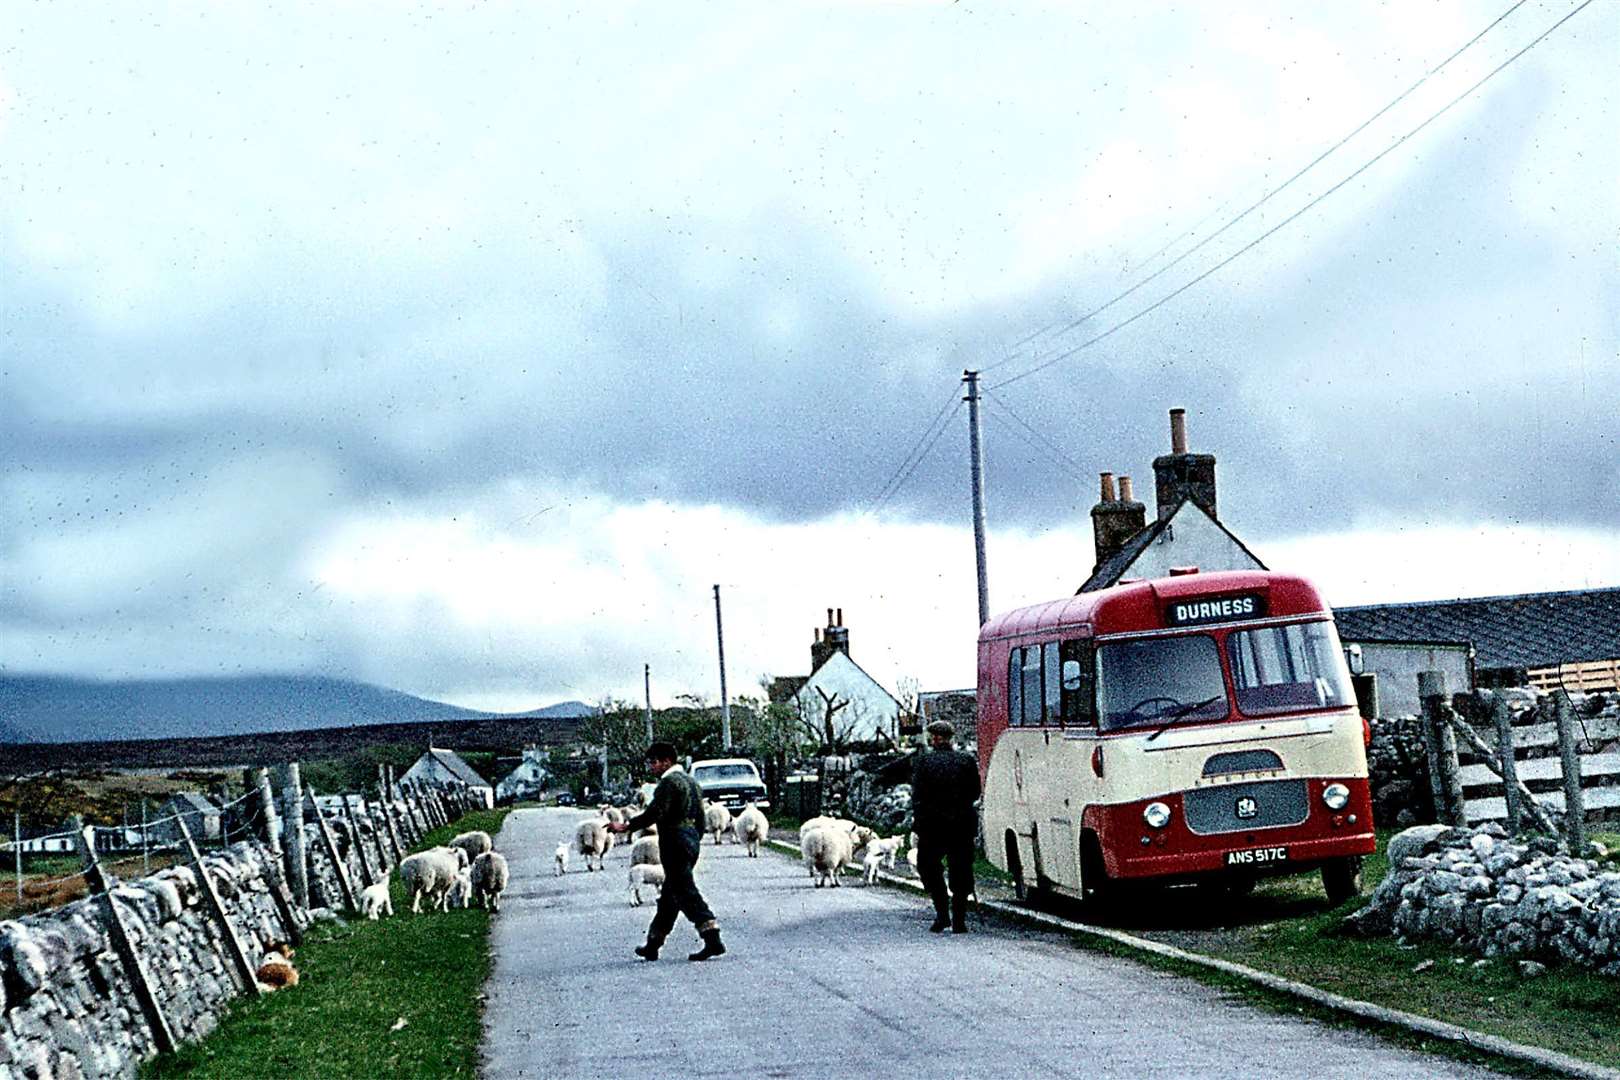 The 1965 picture at Sangomore, Durness, shows the late Michael Mather, who took over as driver from his father Jimmy, and his uncle Tom, driving sheep past the bus.